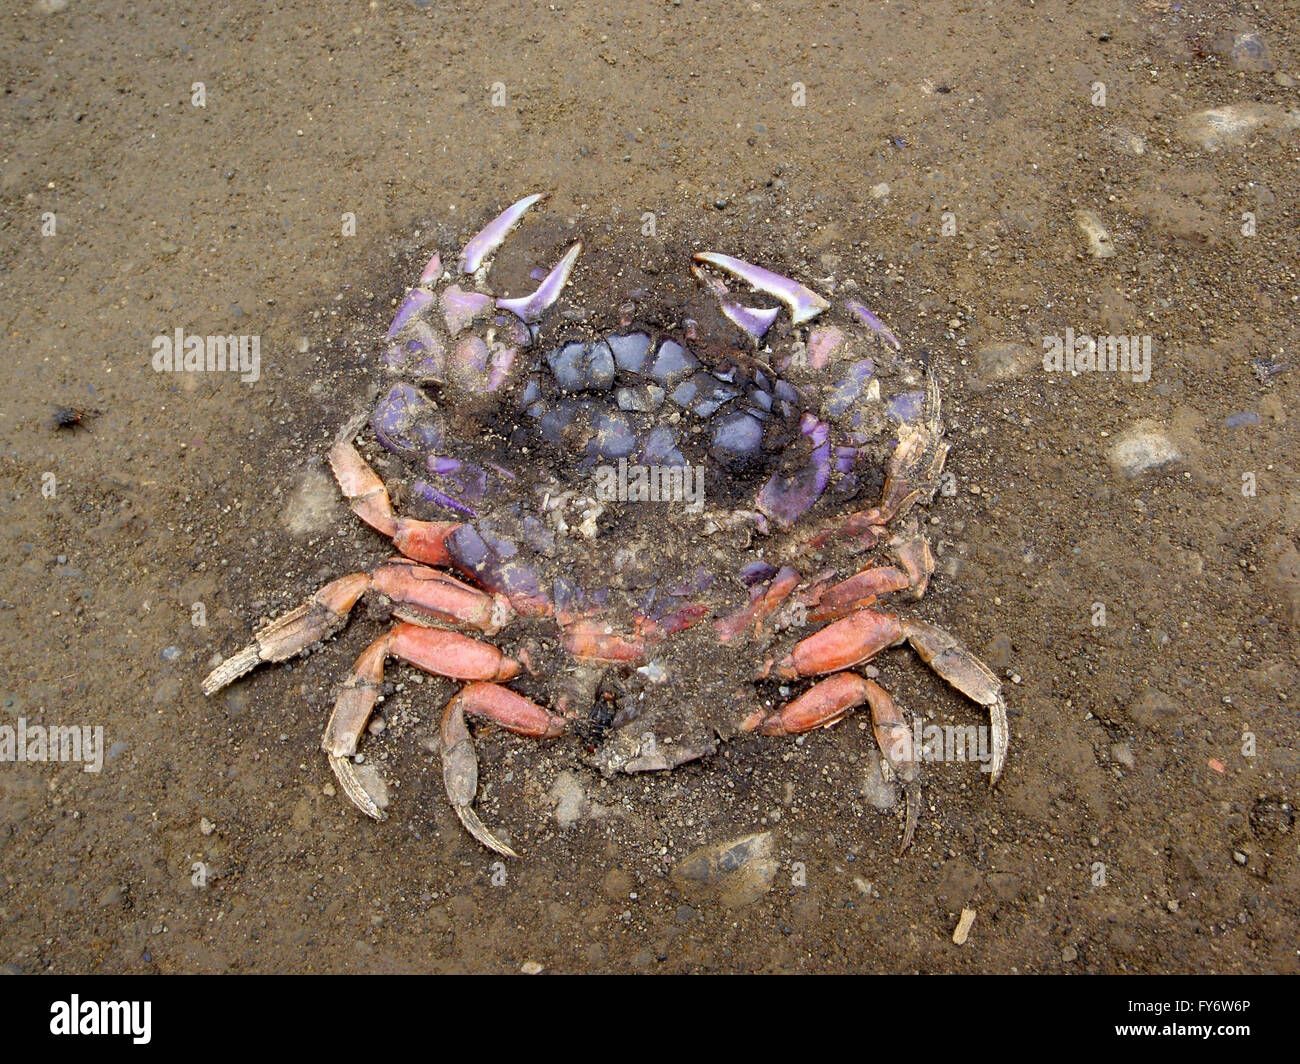 Roadkill Rainbow colored Crab, crushed into a dirt road in Costa Rica. Stock Photo